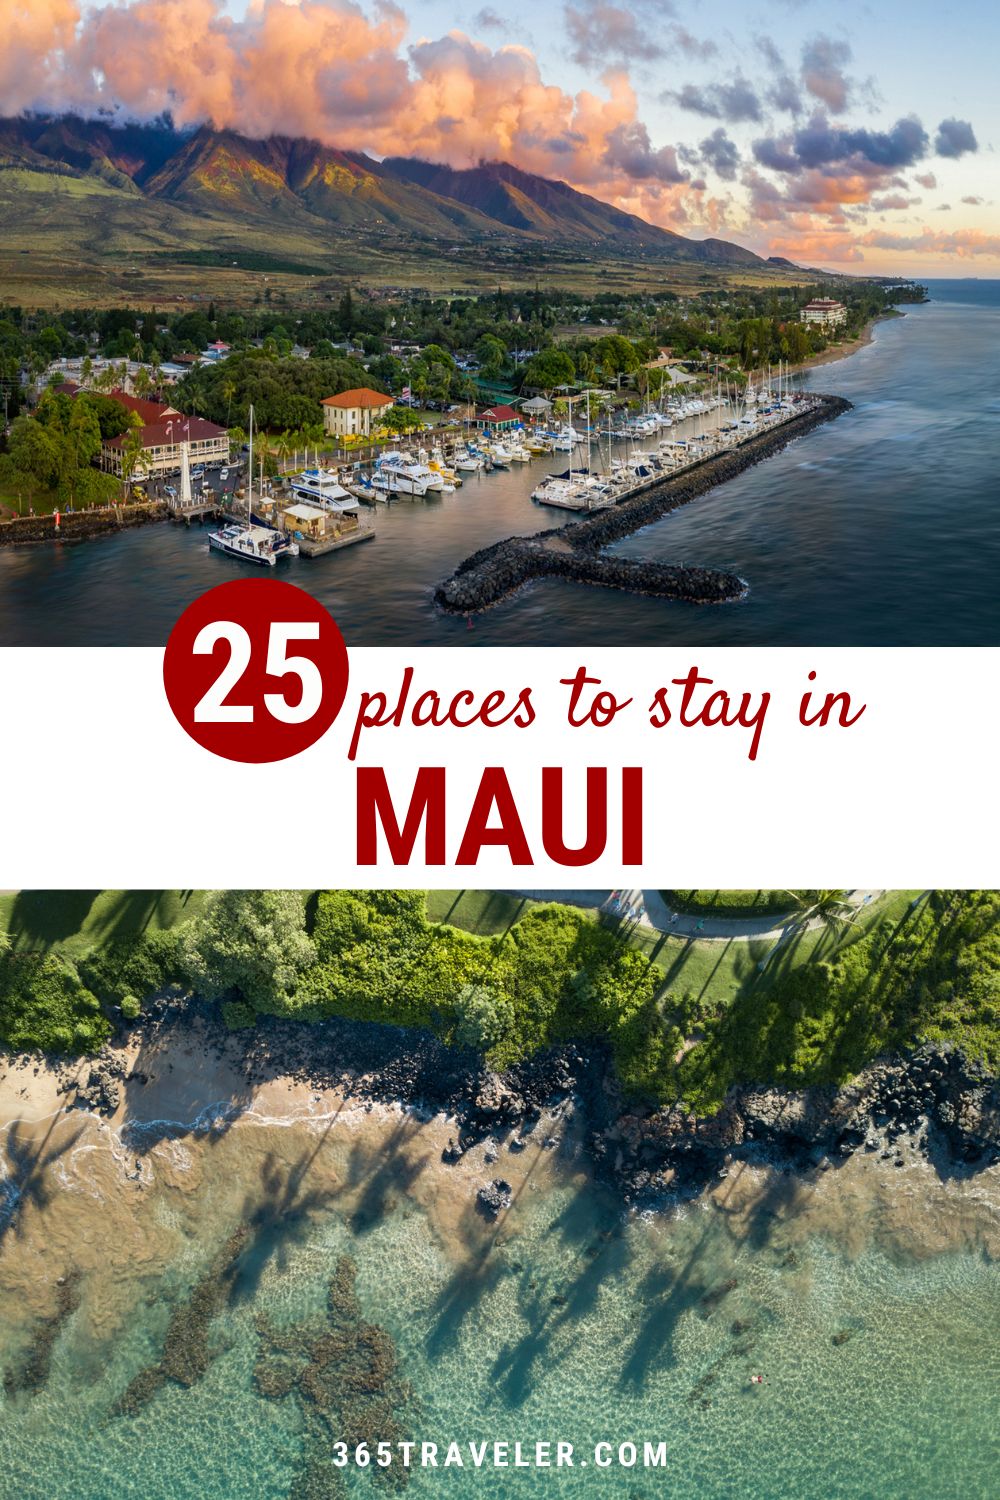 WONDERING WHERE TO STAY IN MAUI? 25 GREAT SPOTS YOU'LL LOVE